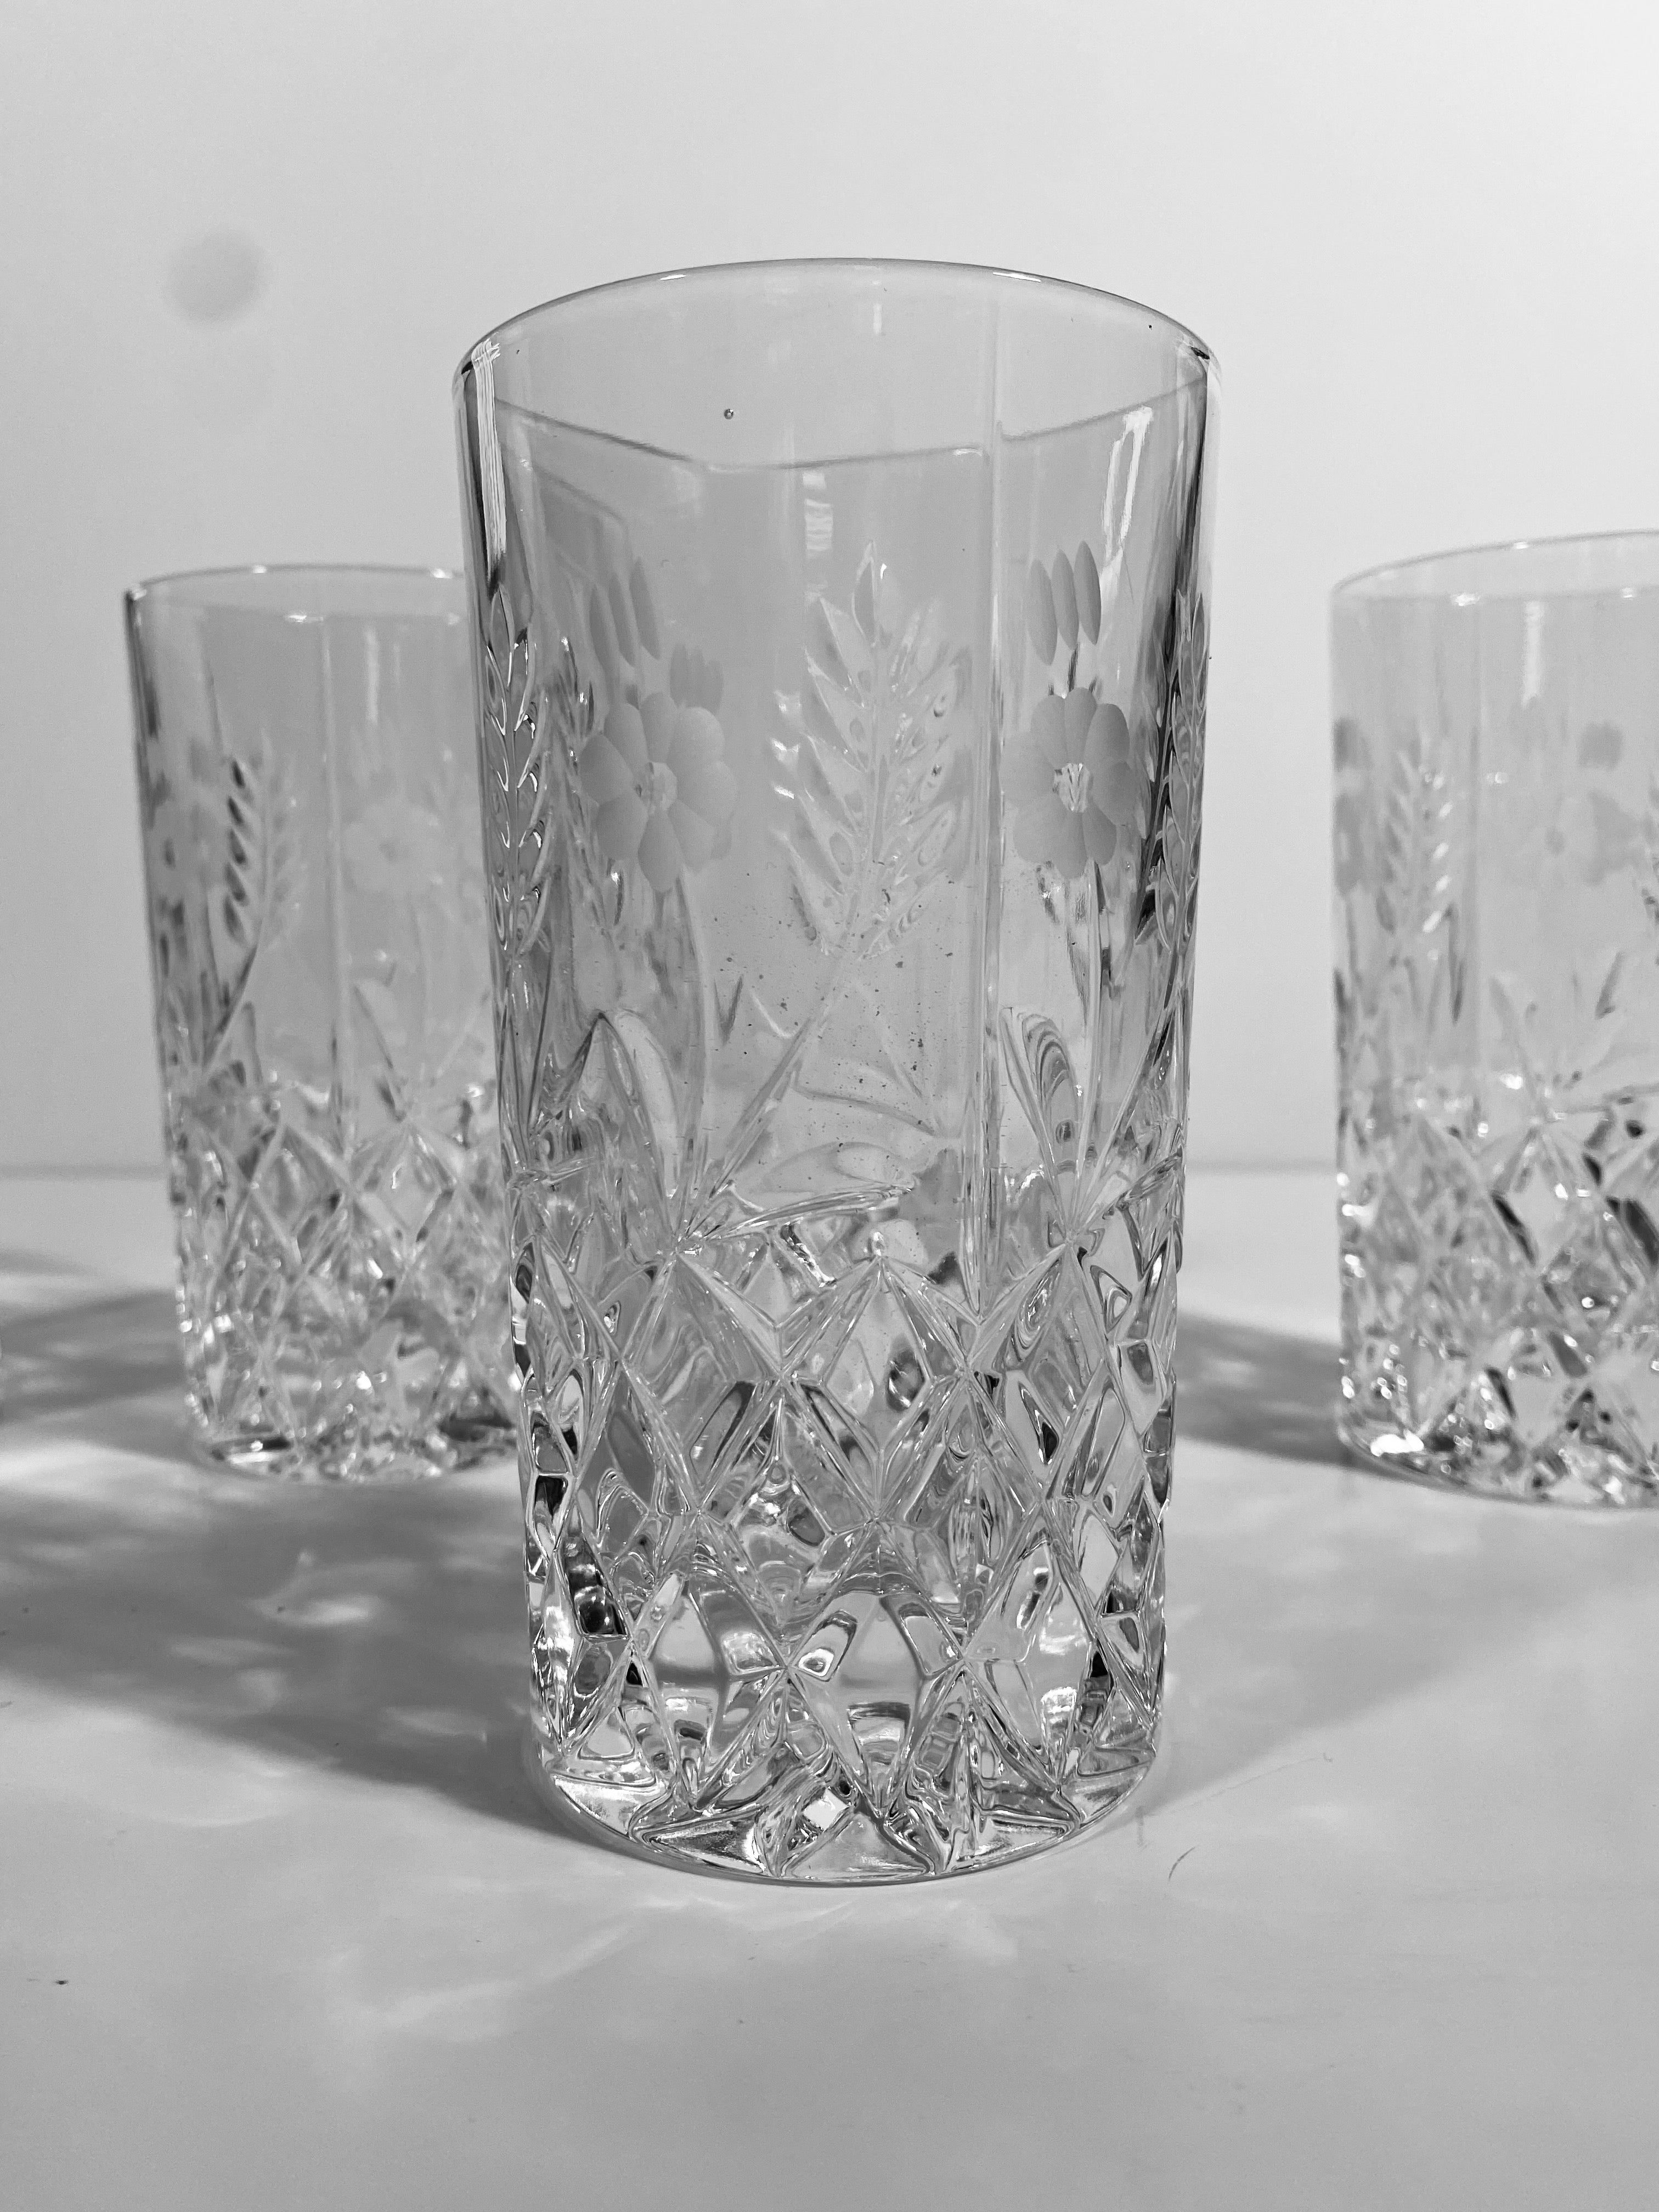 Vintage Shannon Crystal water glass/tumbler